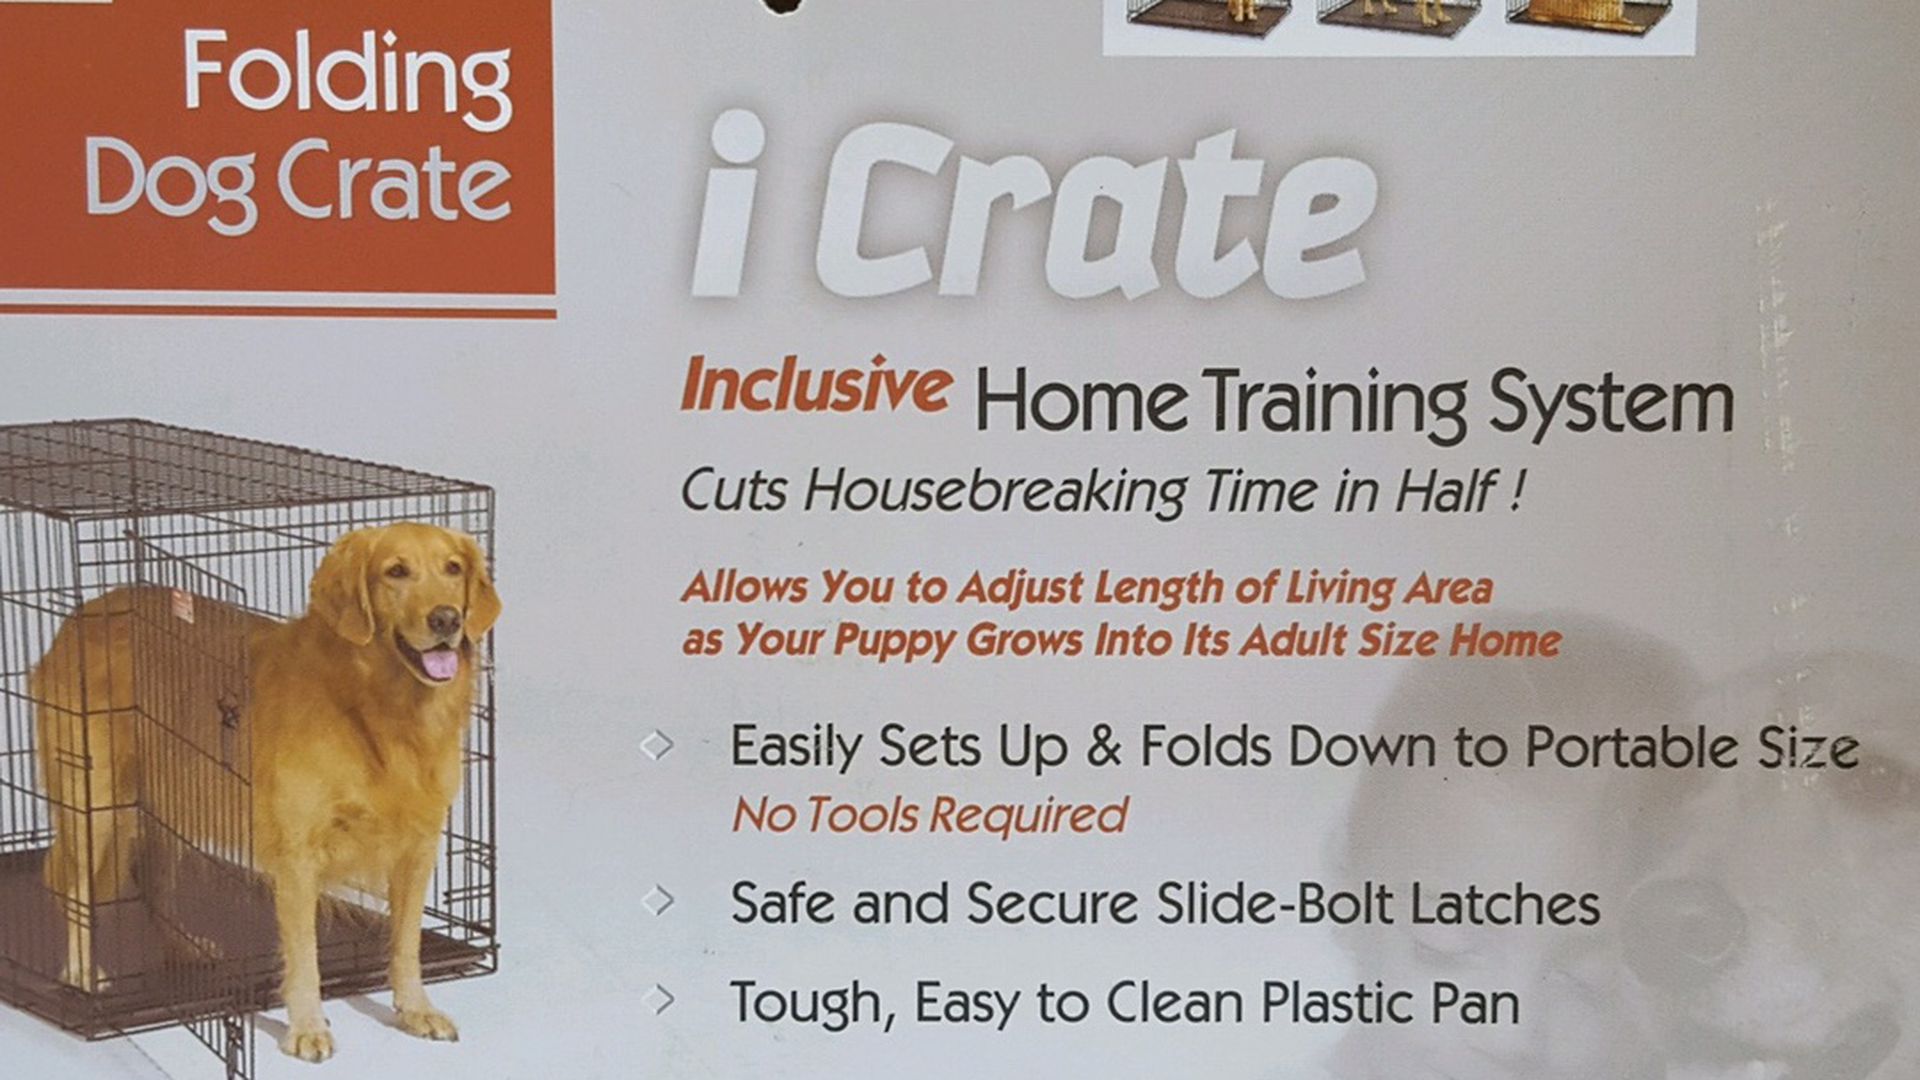 icrate Folding Dog Crate New In Box